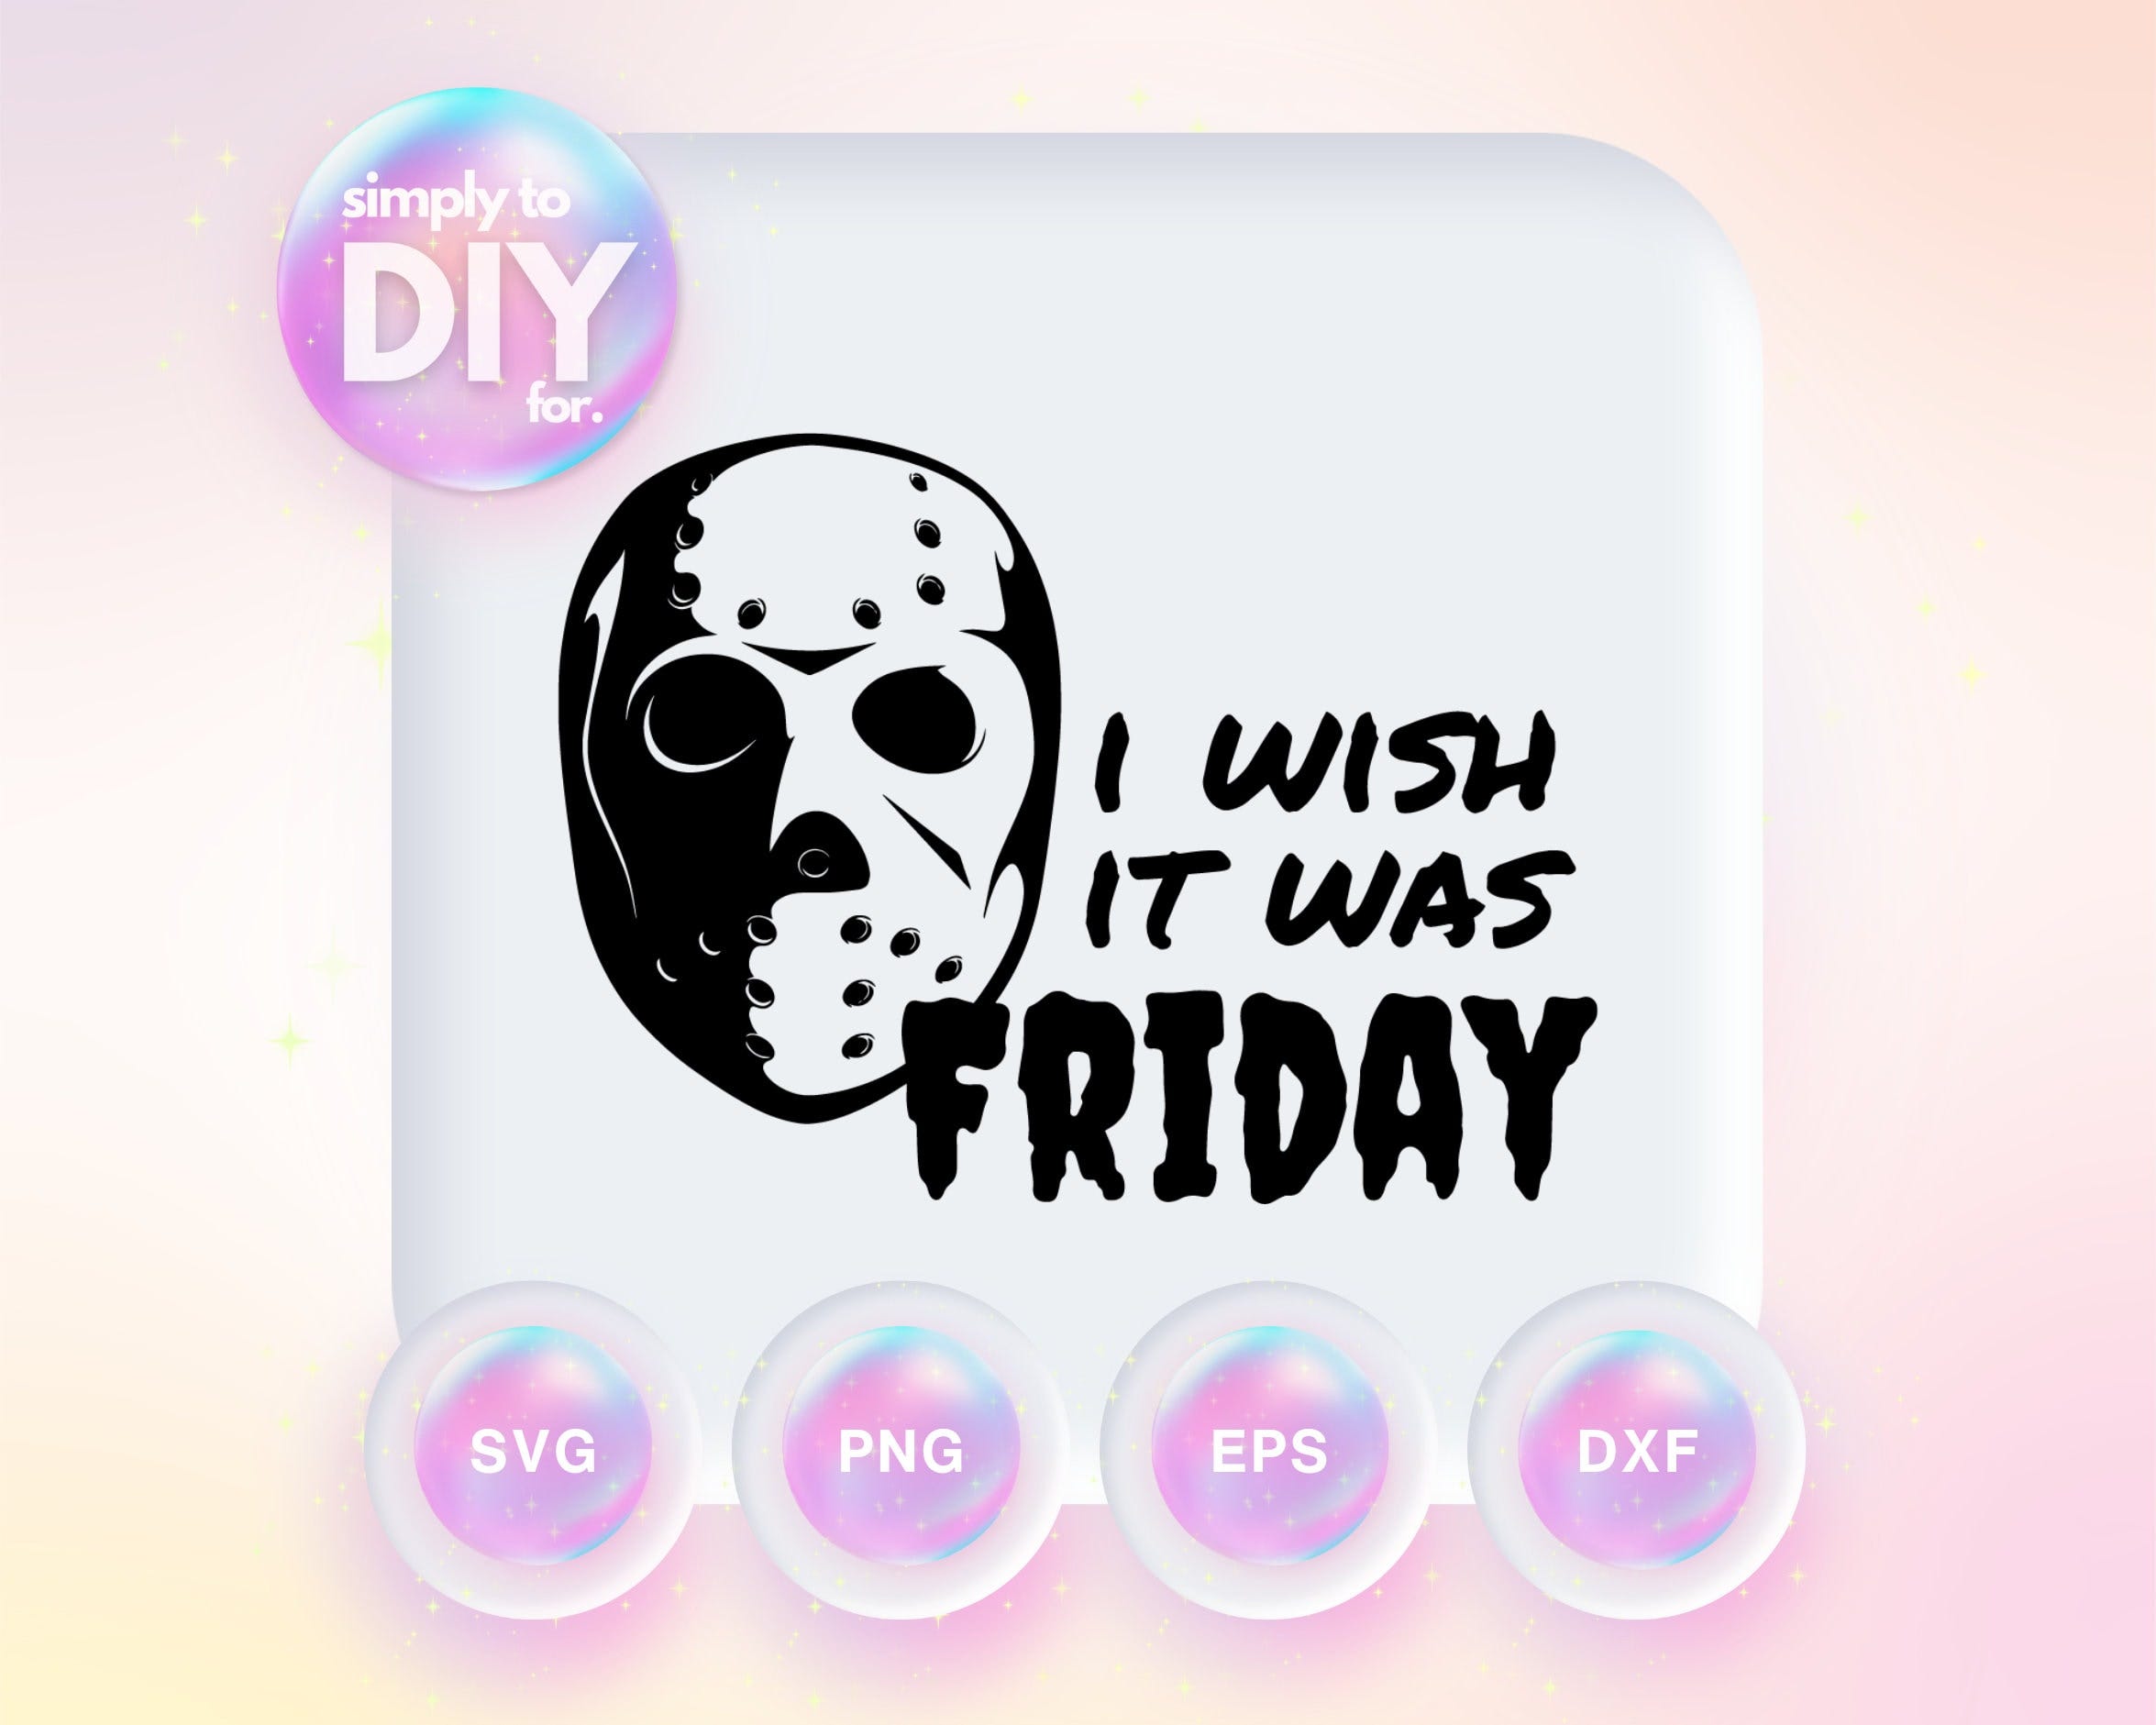 I Wish It Was Friday - Funny Halloween Shirt - Horror Movie - SVG DXF eps png cut files - Cricut - Vinyl Cutting - Print File - Download